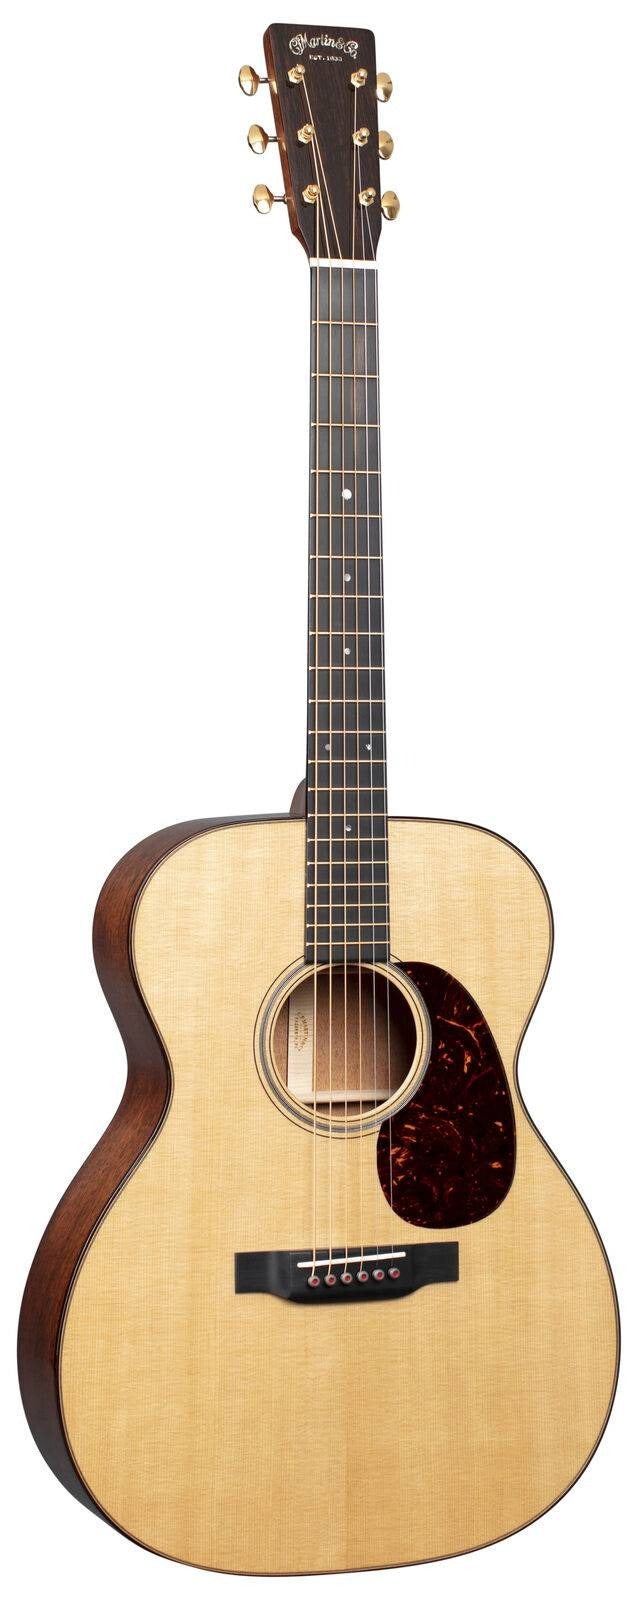 Martin 000-18 Modern Deluxe 000 Acoustic Guitar Full VTS Solid Spruce Top, Mahogany Back & Sides w/Hardcase